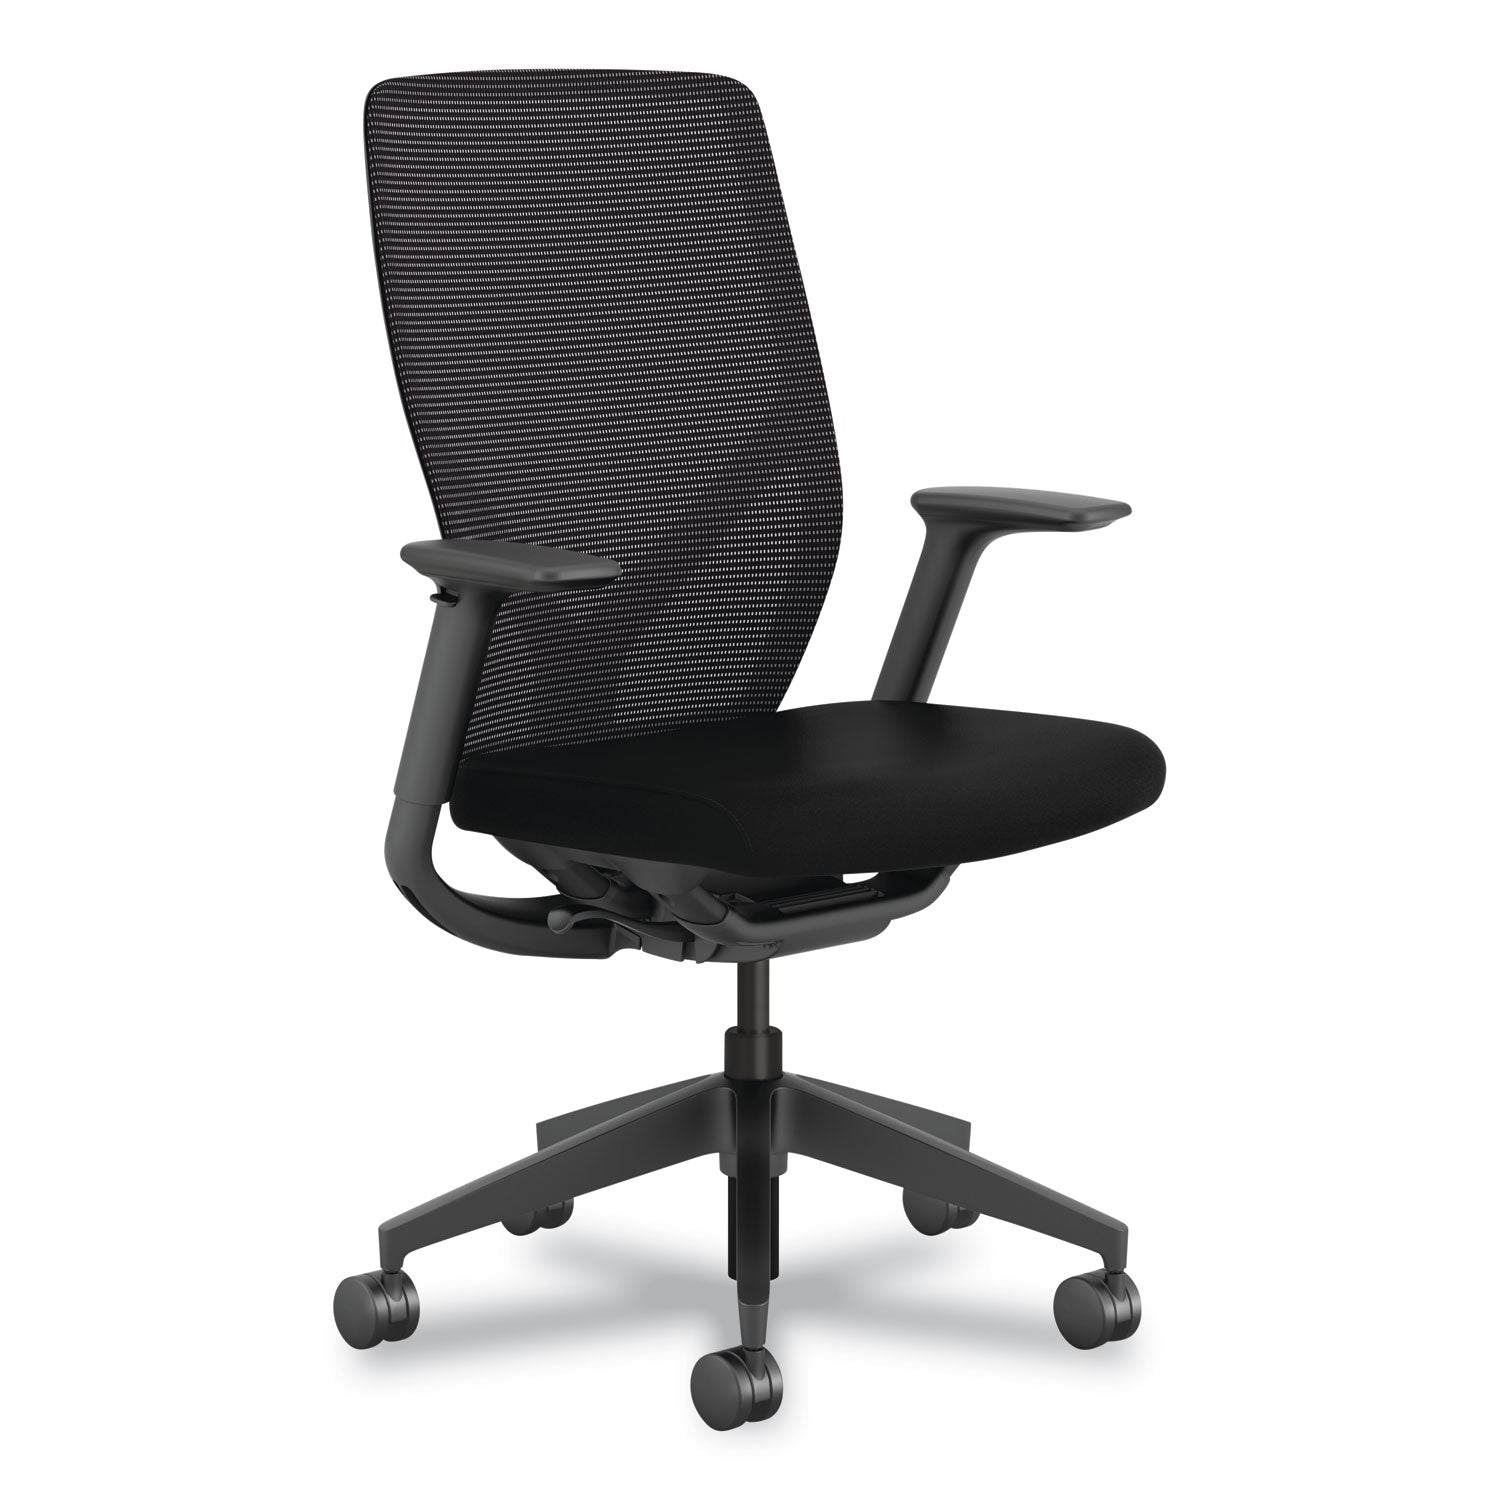 Flexion Mesh Back Task Chair, Supports Up to 300lb, 14.81" to 19.7" Seat Height, Black Seat/Back/Base - 1